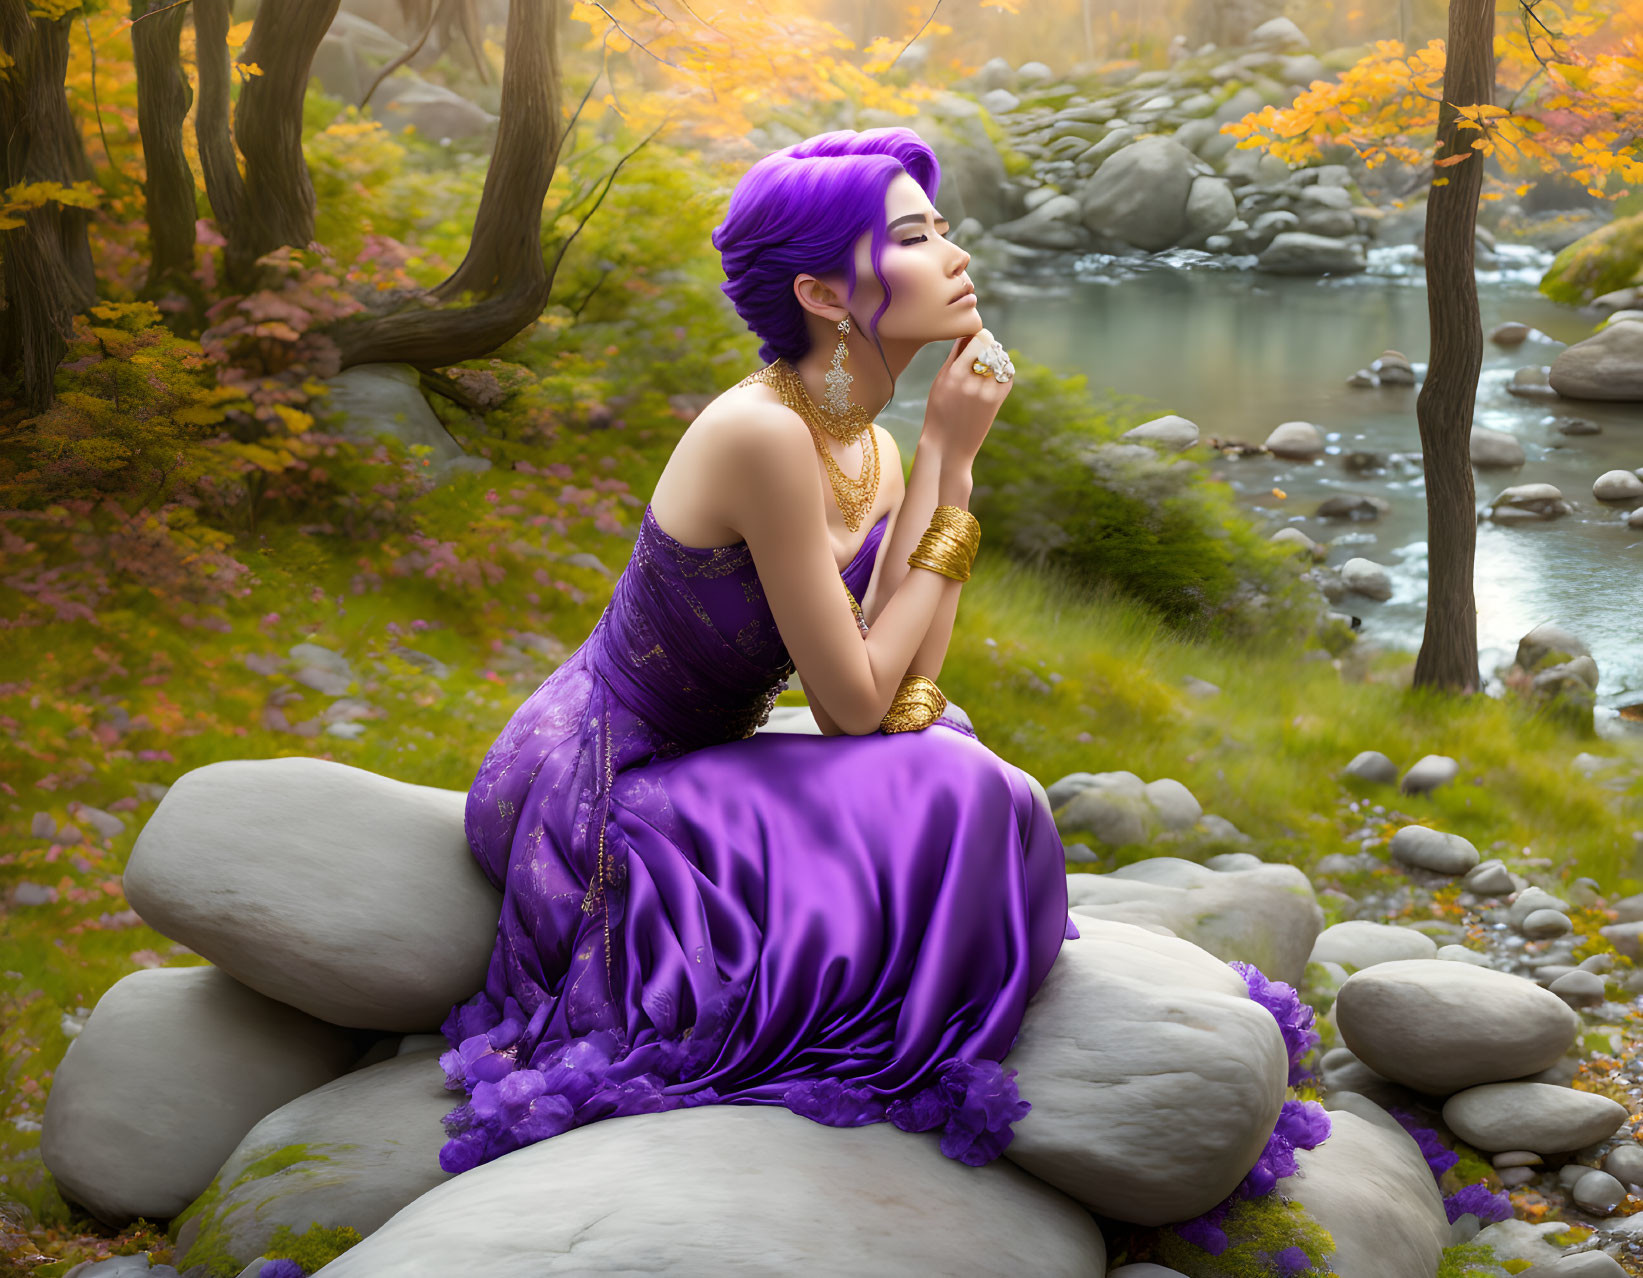 Purple-haired woman in floral gown by autumn stream